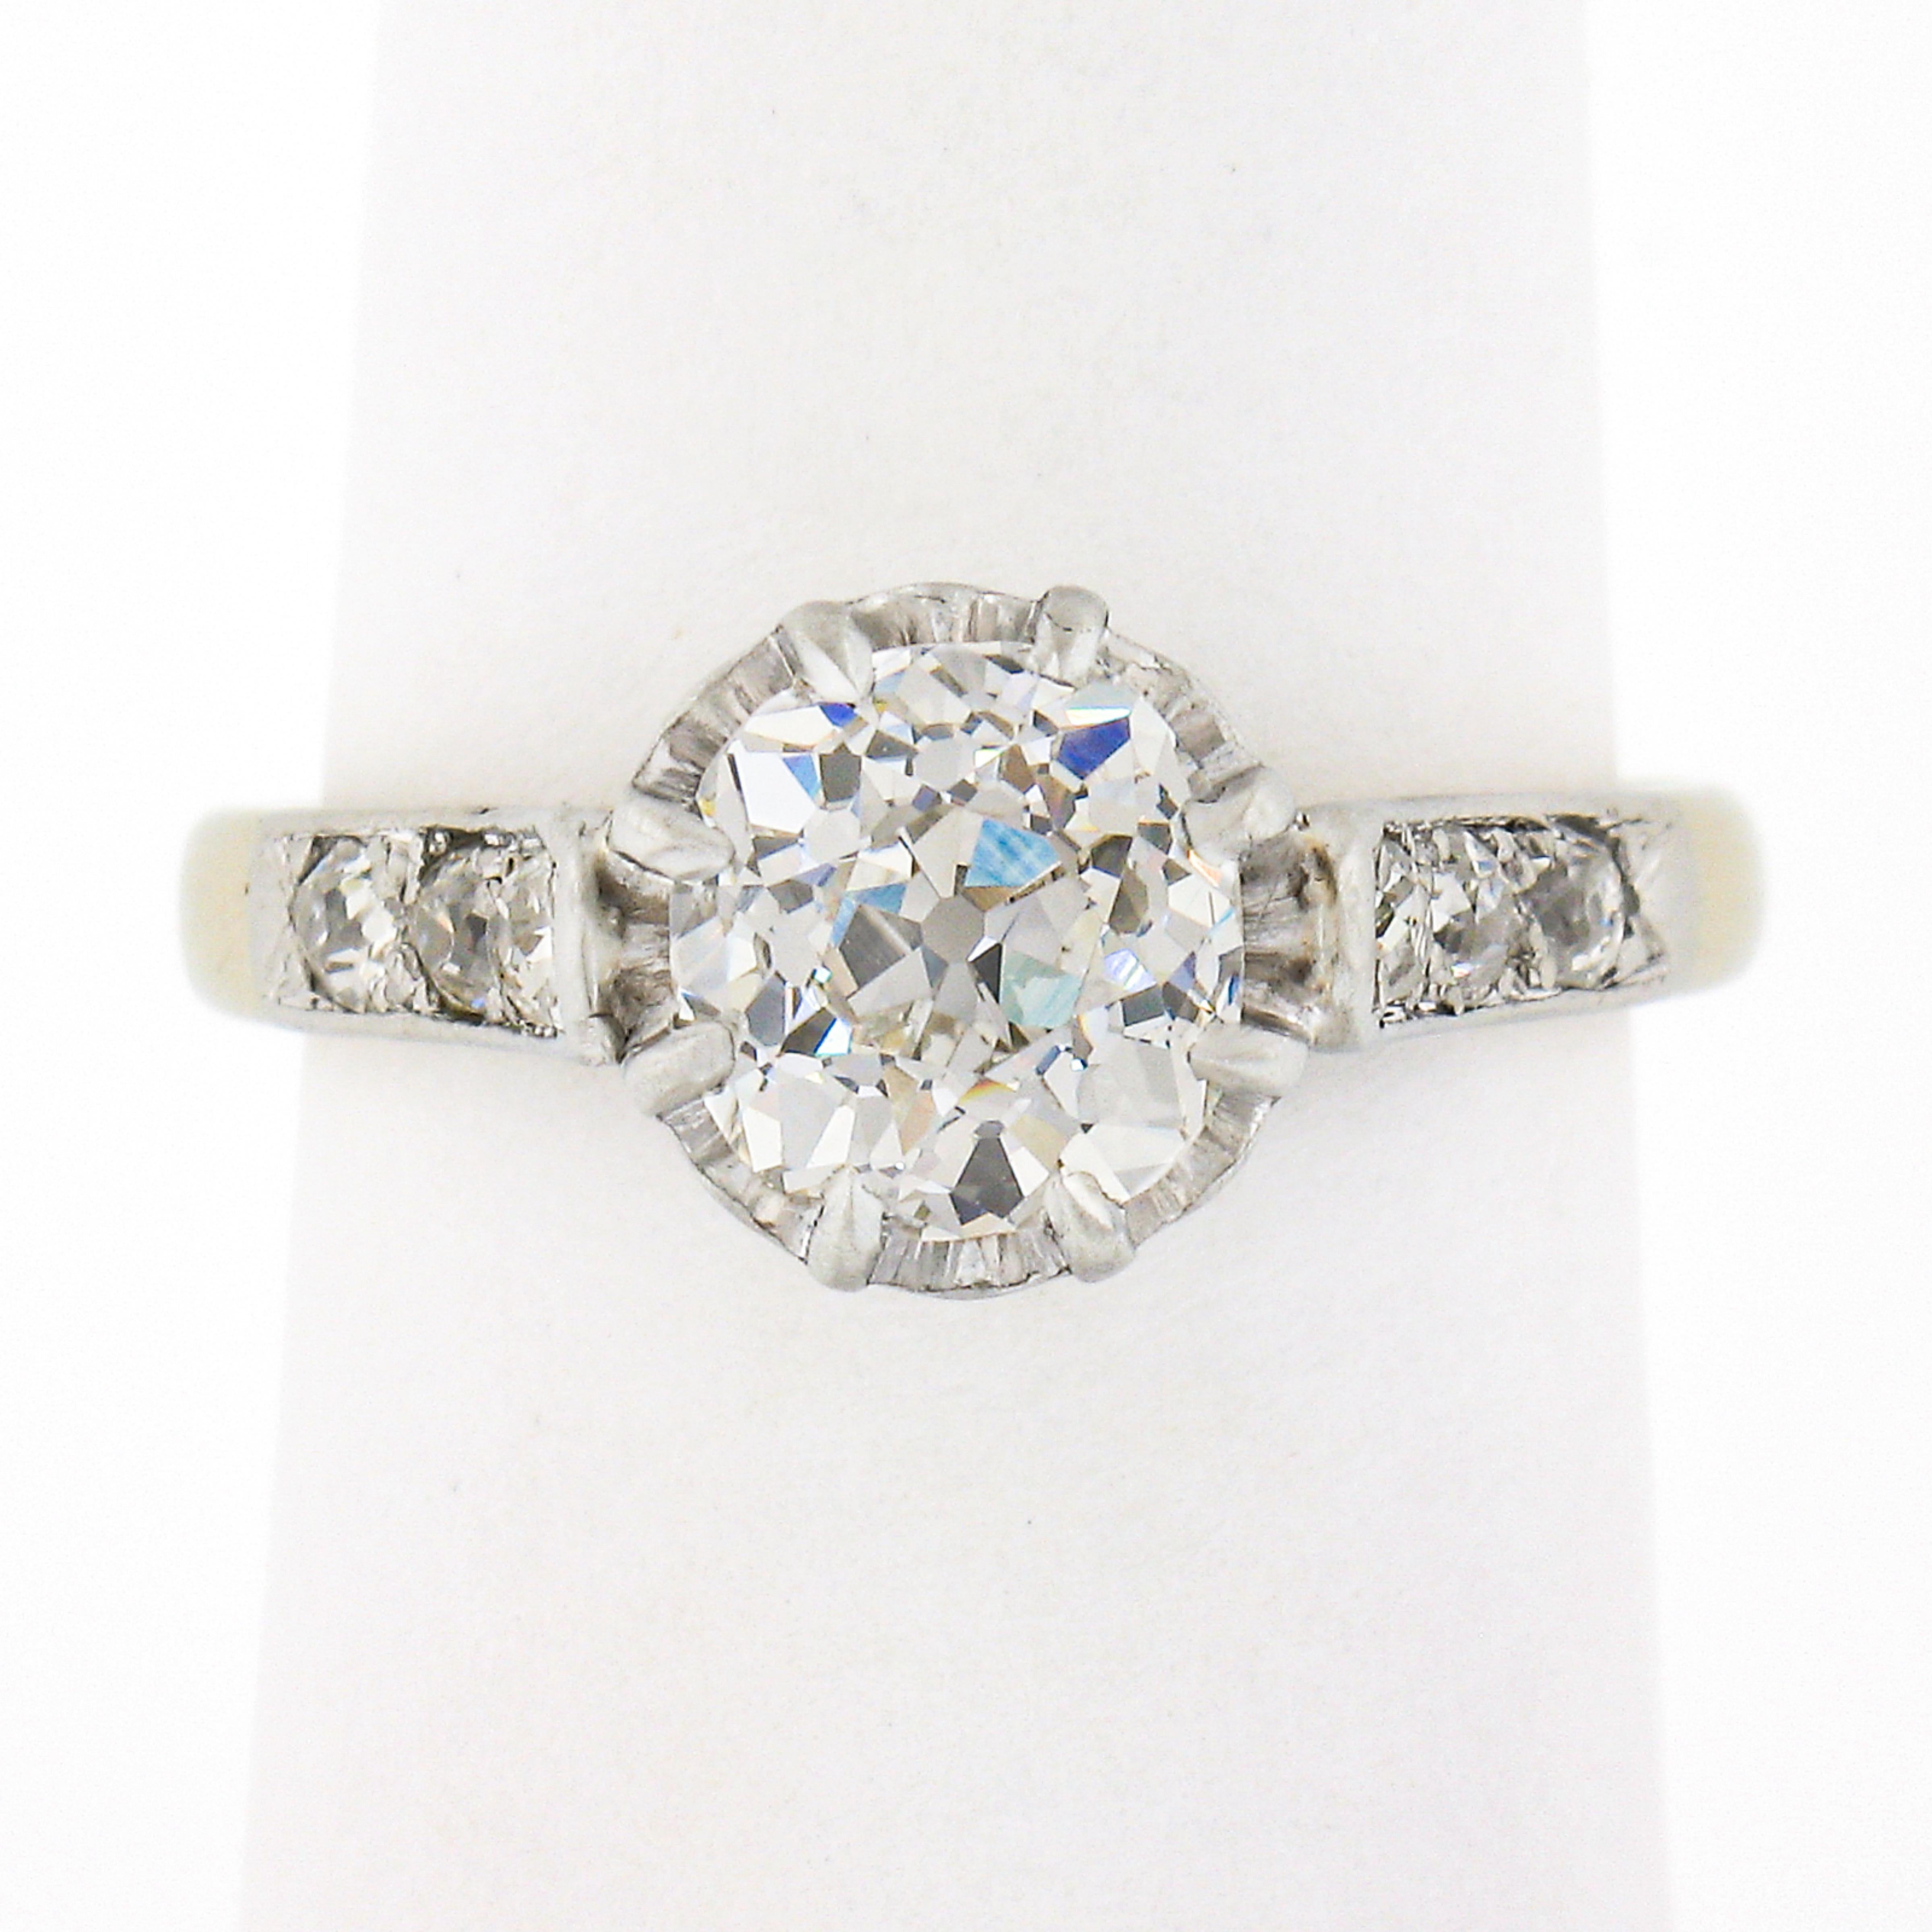 This breathtaking, all original, antique diamond engagement ring was crafted in France from solid 18k white gold and platinum during the Edwardian period. It features a gorgeous, GIA certified, old European cut diamond solitaire at its center